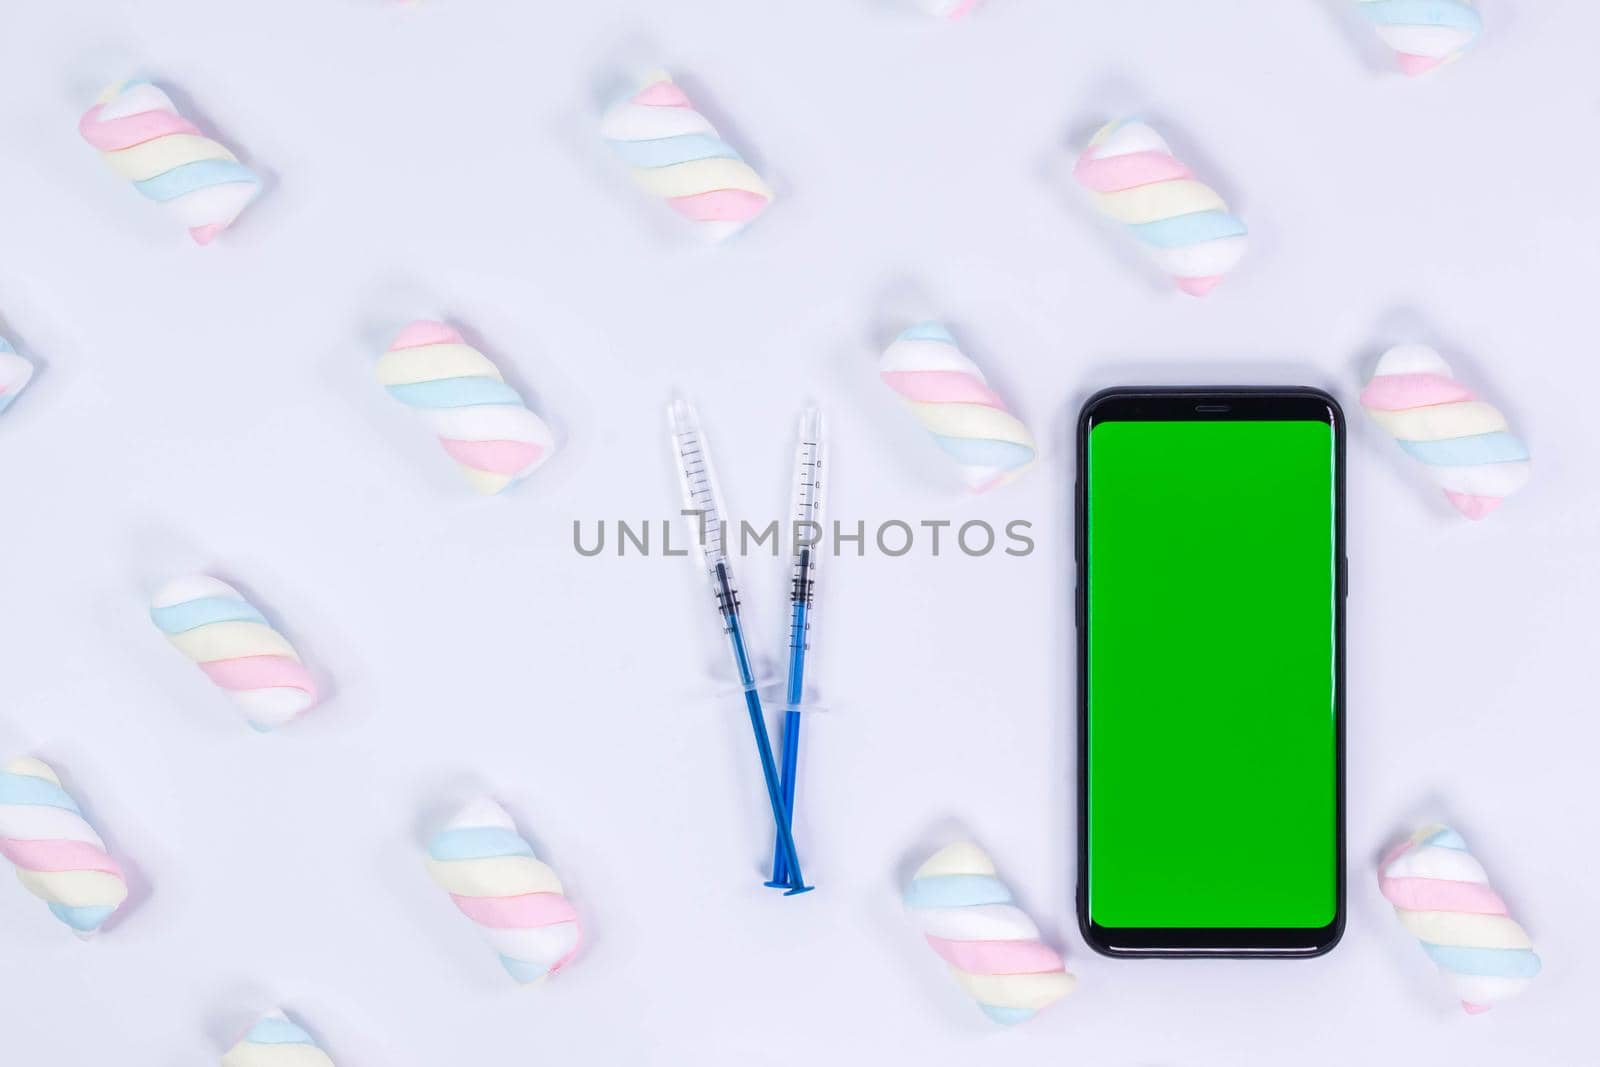 Phone mockup. Syringe with needle and black smartphone with blank screen. White background with twisted marshmallow pattern.